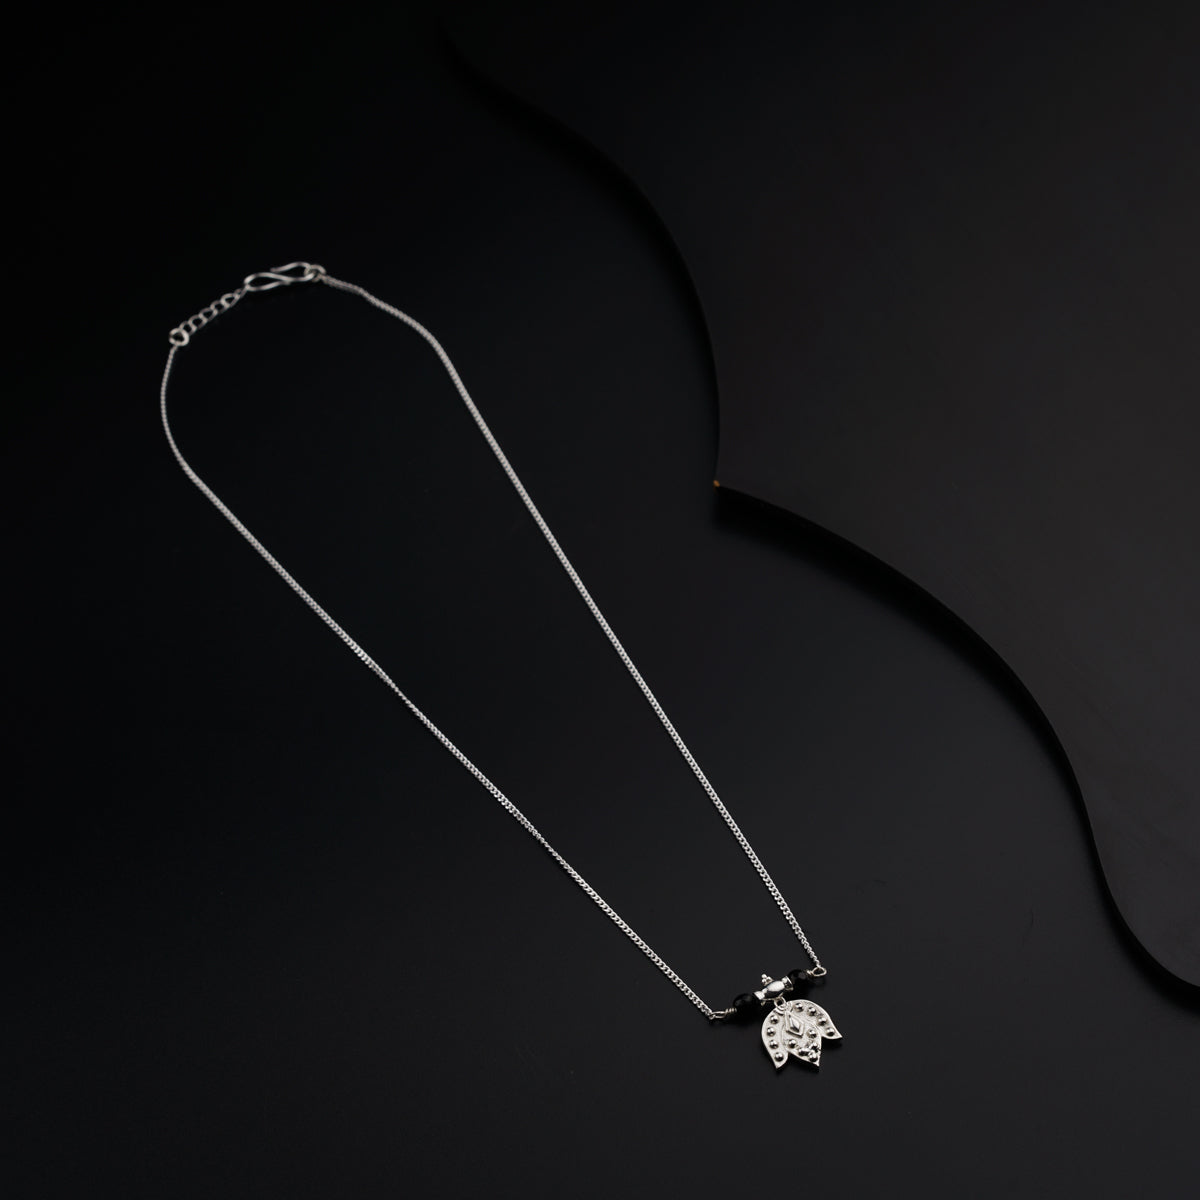 a necklace with a turtle pendant on a black background